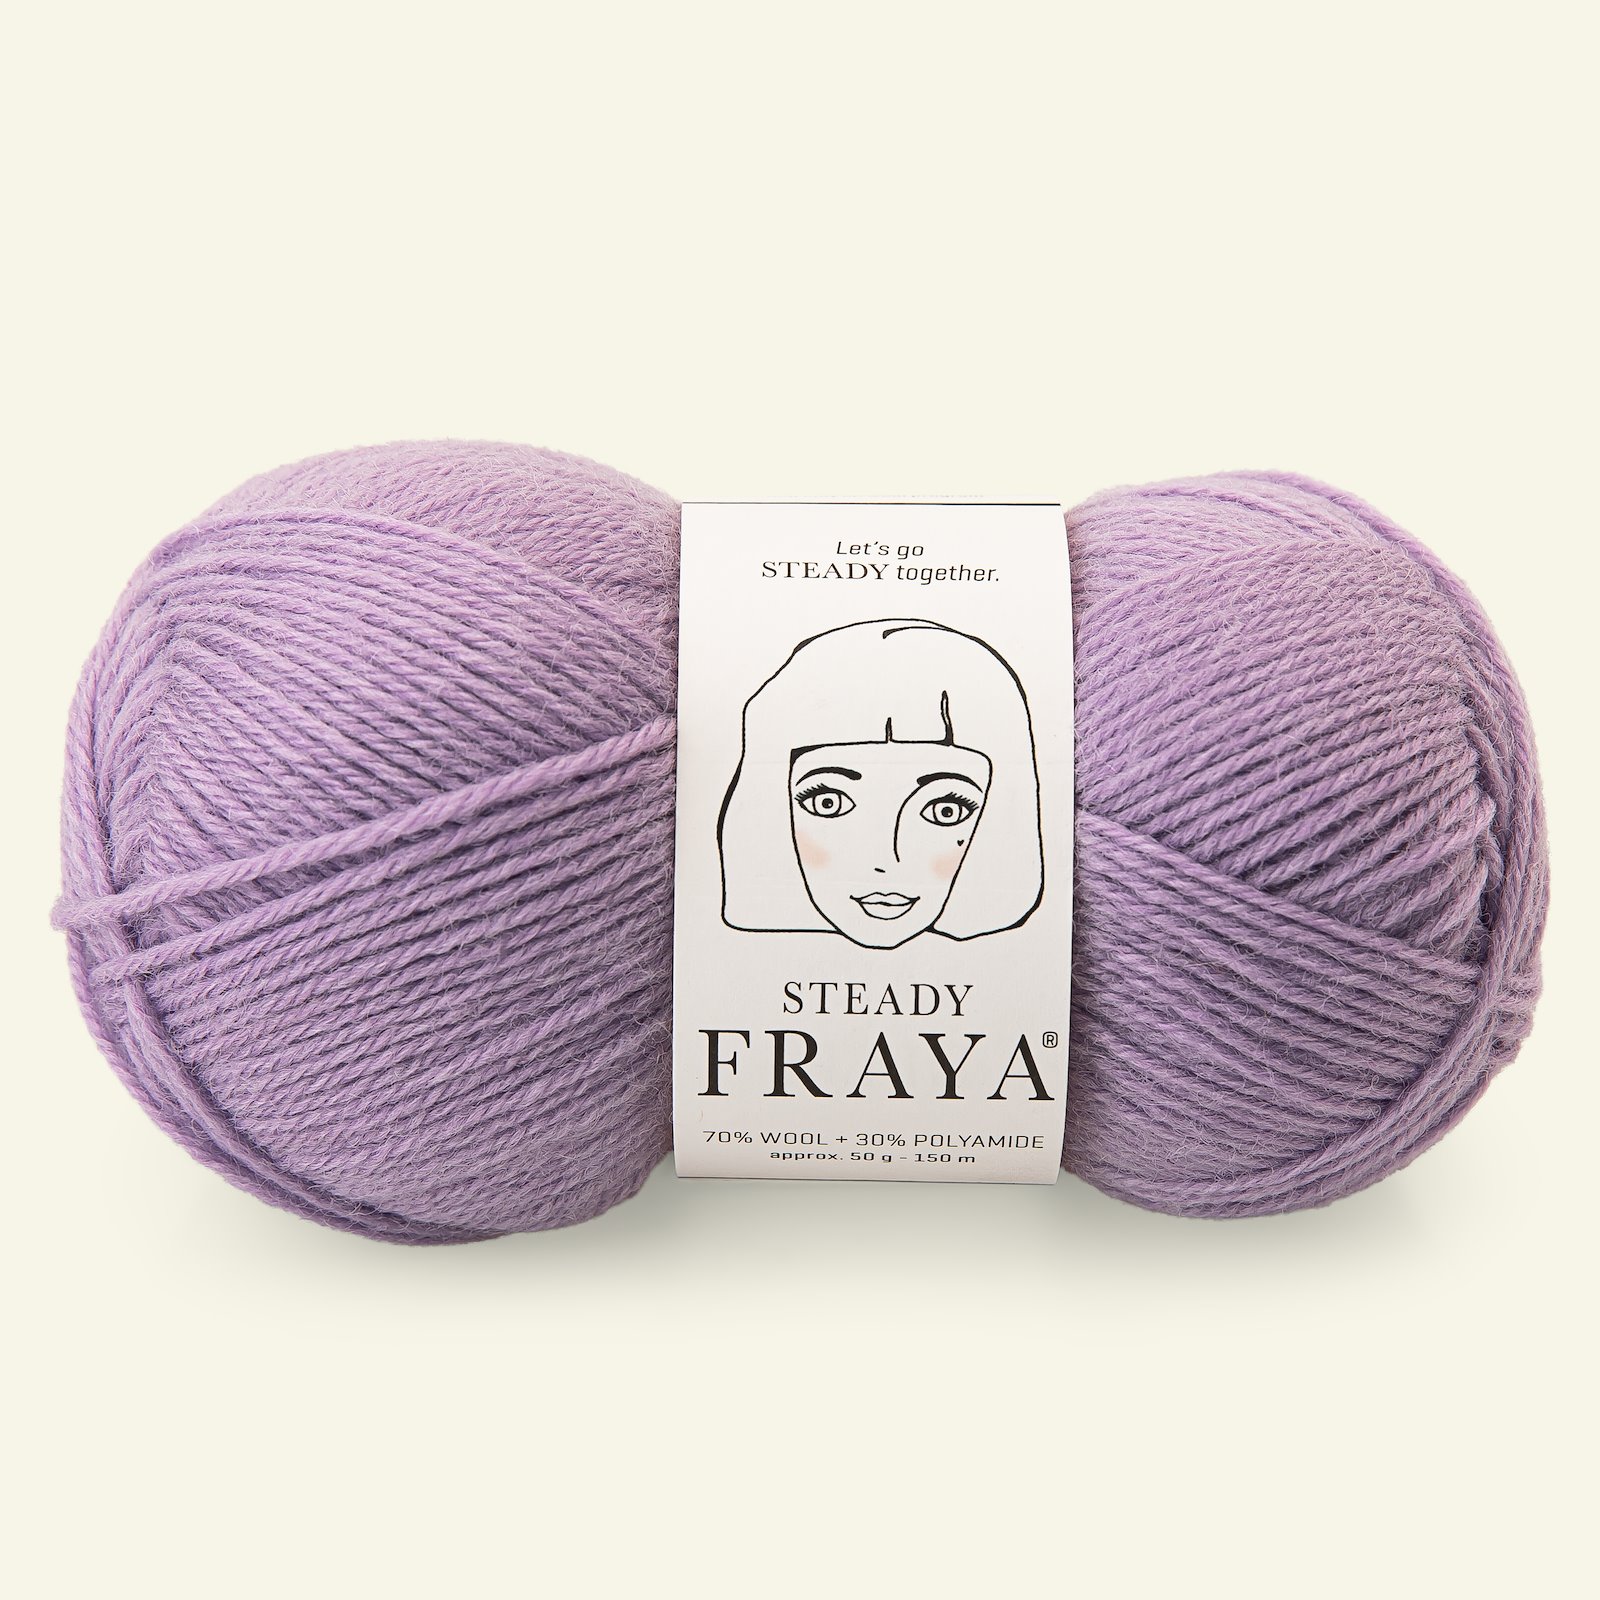 FRAYA, Wolle "Steady", lilac 90000146_pack